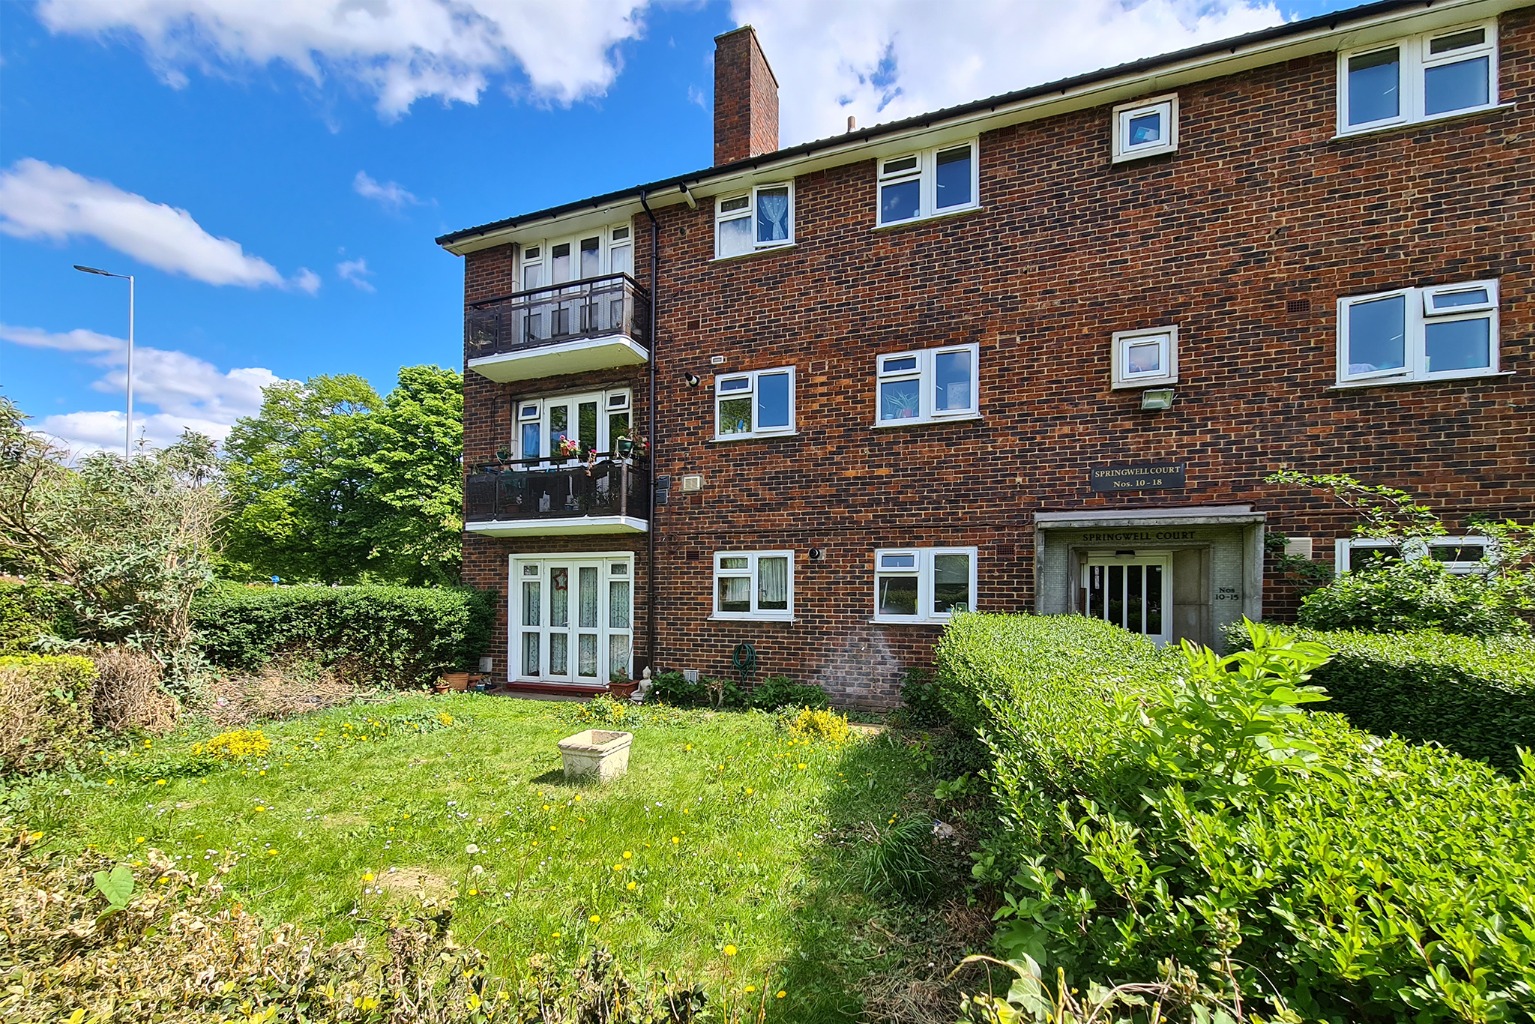 Check out this two double bedroom apartment with it own private garden. Being sold with no onwards chain or tenants in situ, this apartment would make an ideal purchase for any first time buyers or investors